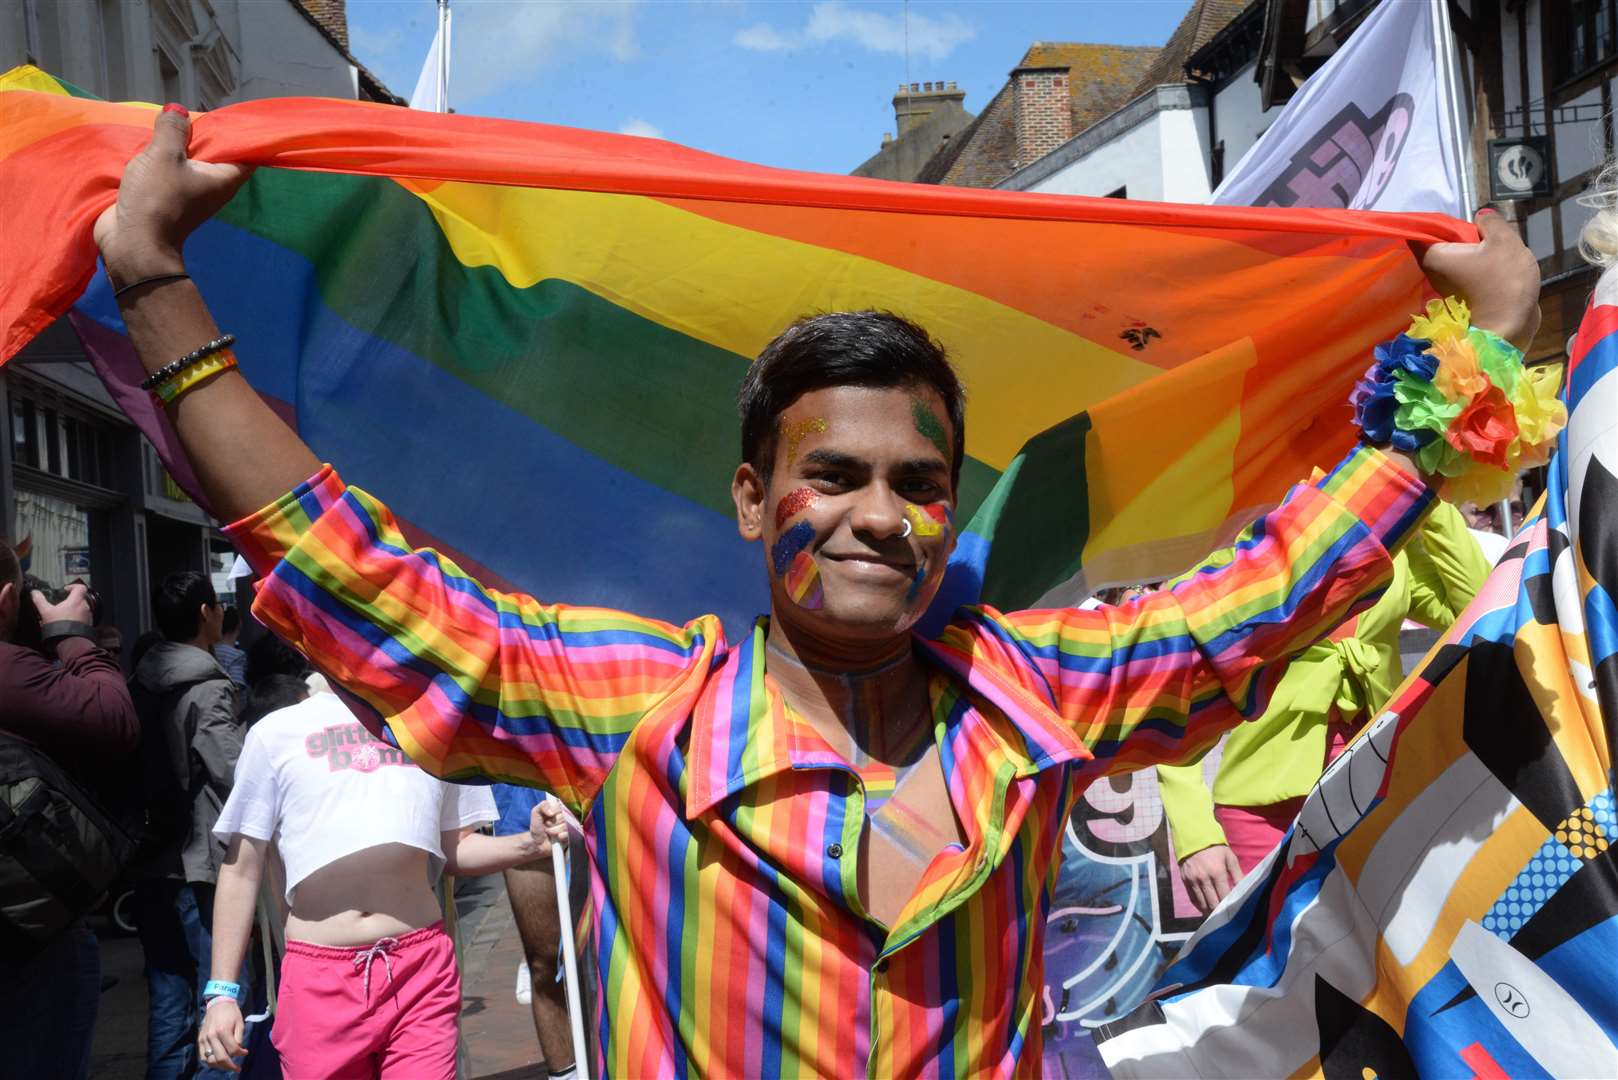 Canterbury won't be getting its annual dose of the colourful LGBT parade this year